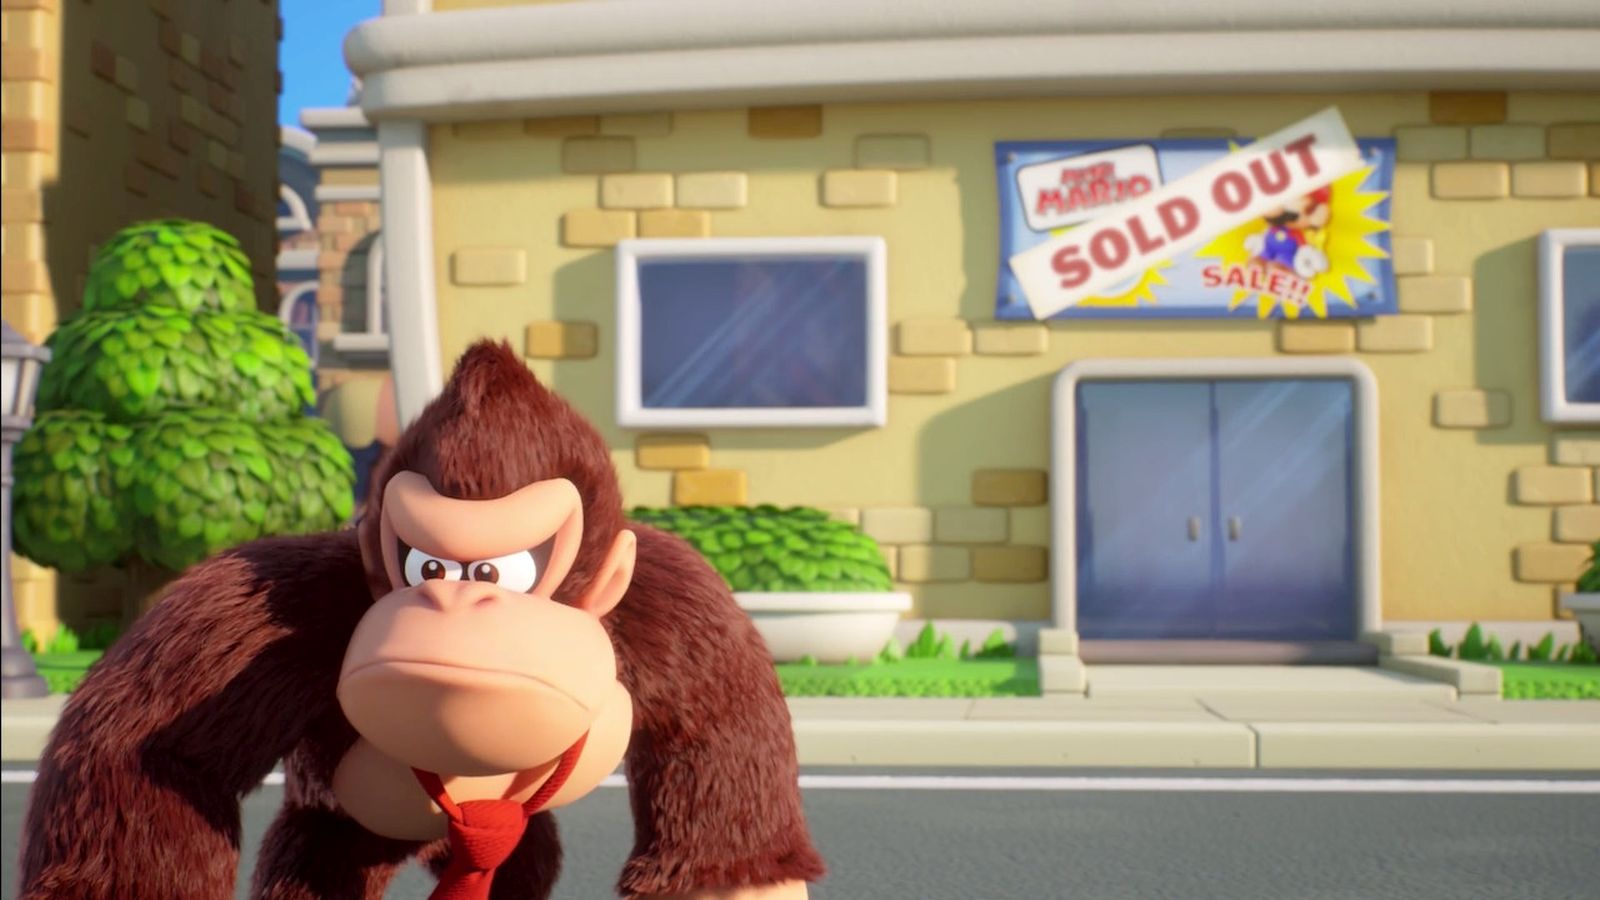 Would you like a new Donkey Kong game with Mario as the